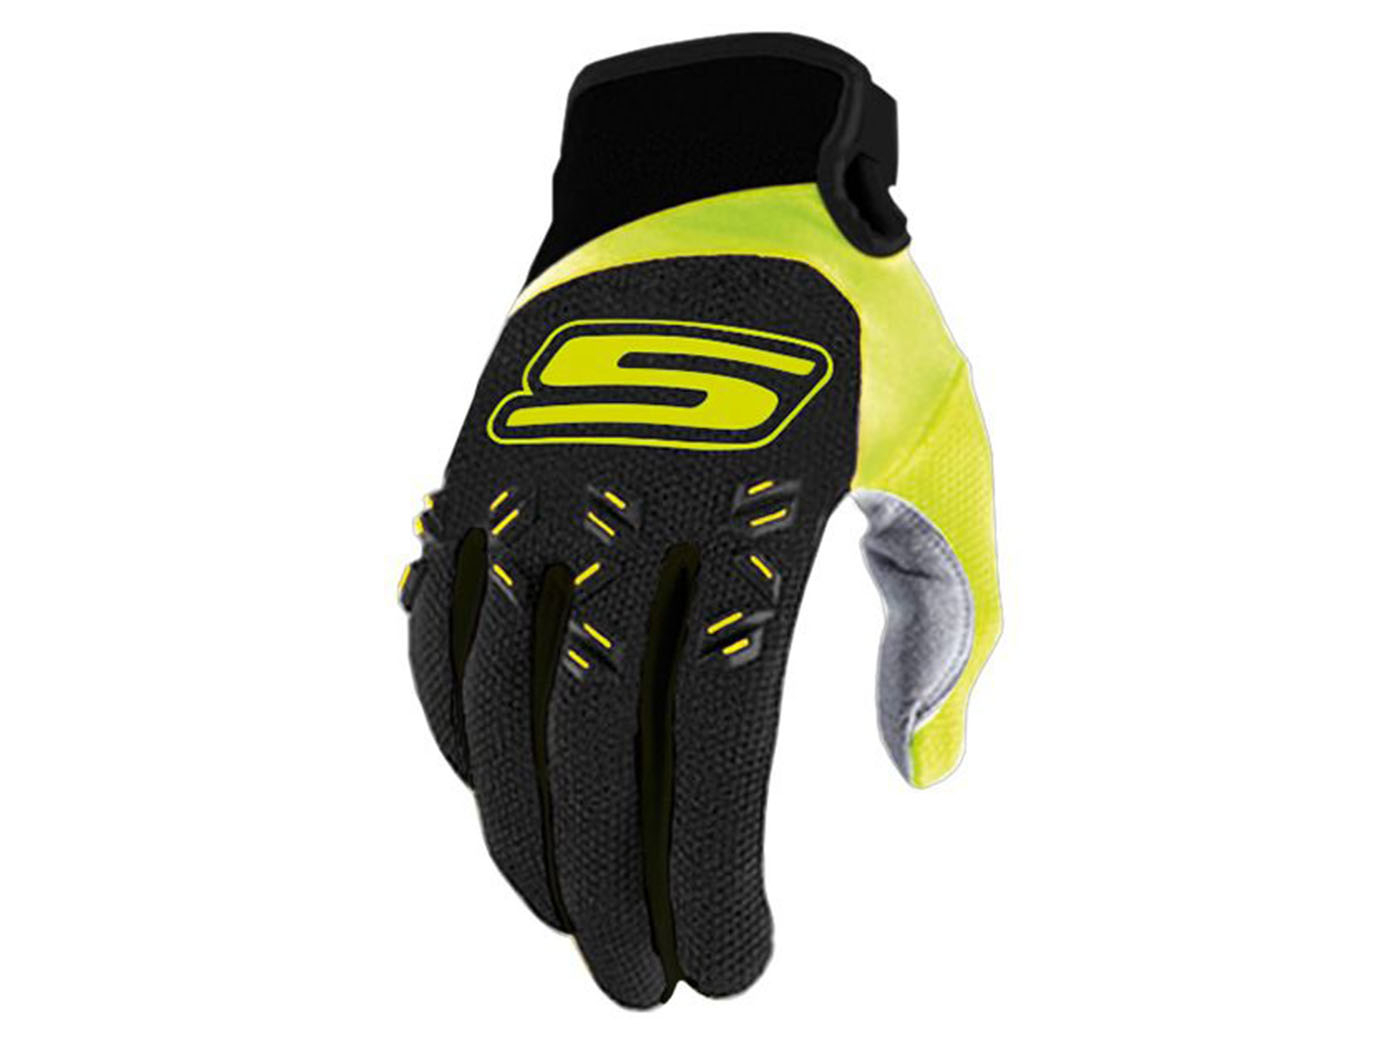 MX Gloves S-Line Homologated, Black / Fluo Yellow - Size M